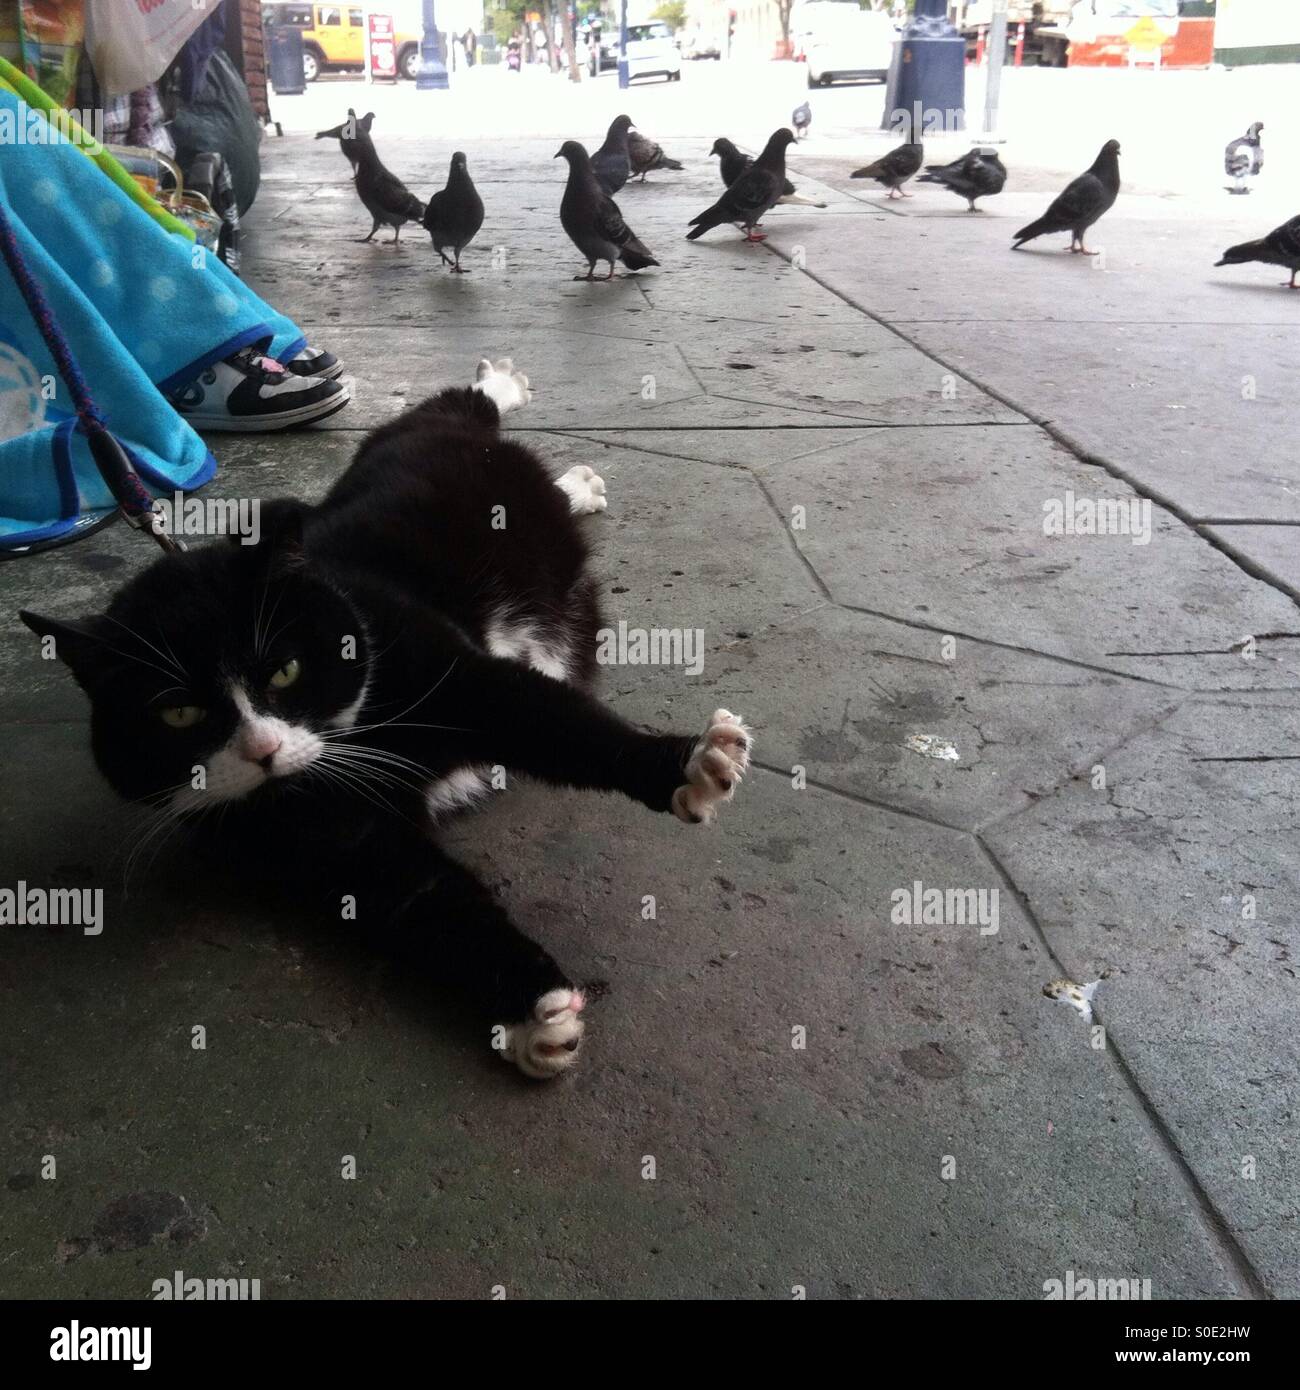 Cat on a leash with pigeons in background on San Diego street. Stock Photo